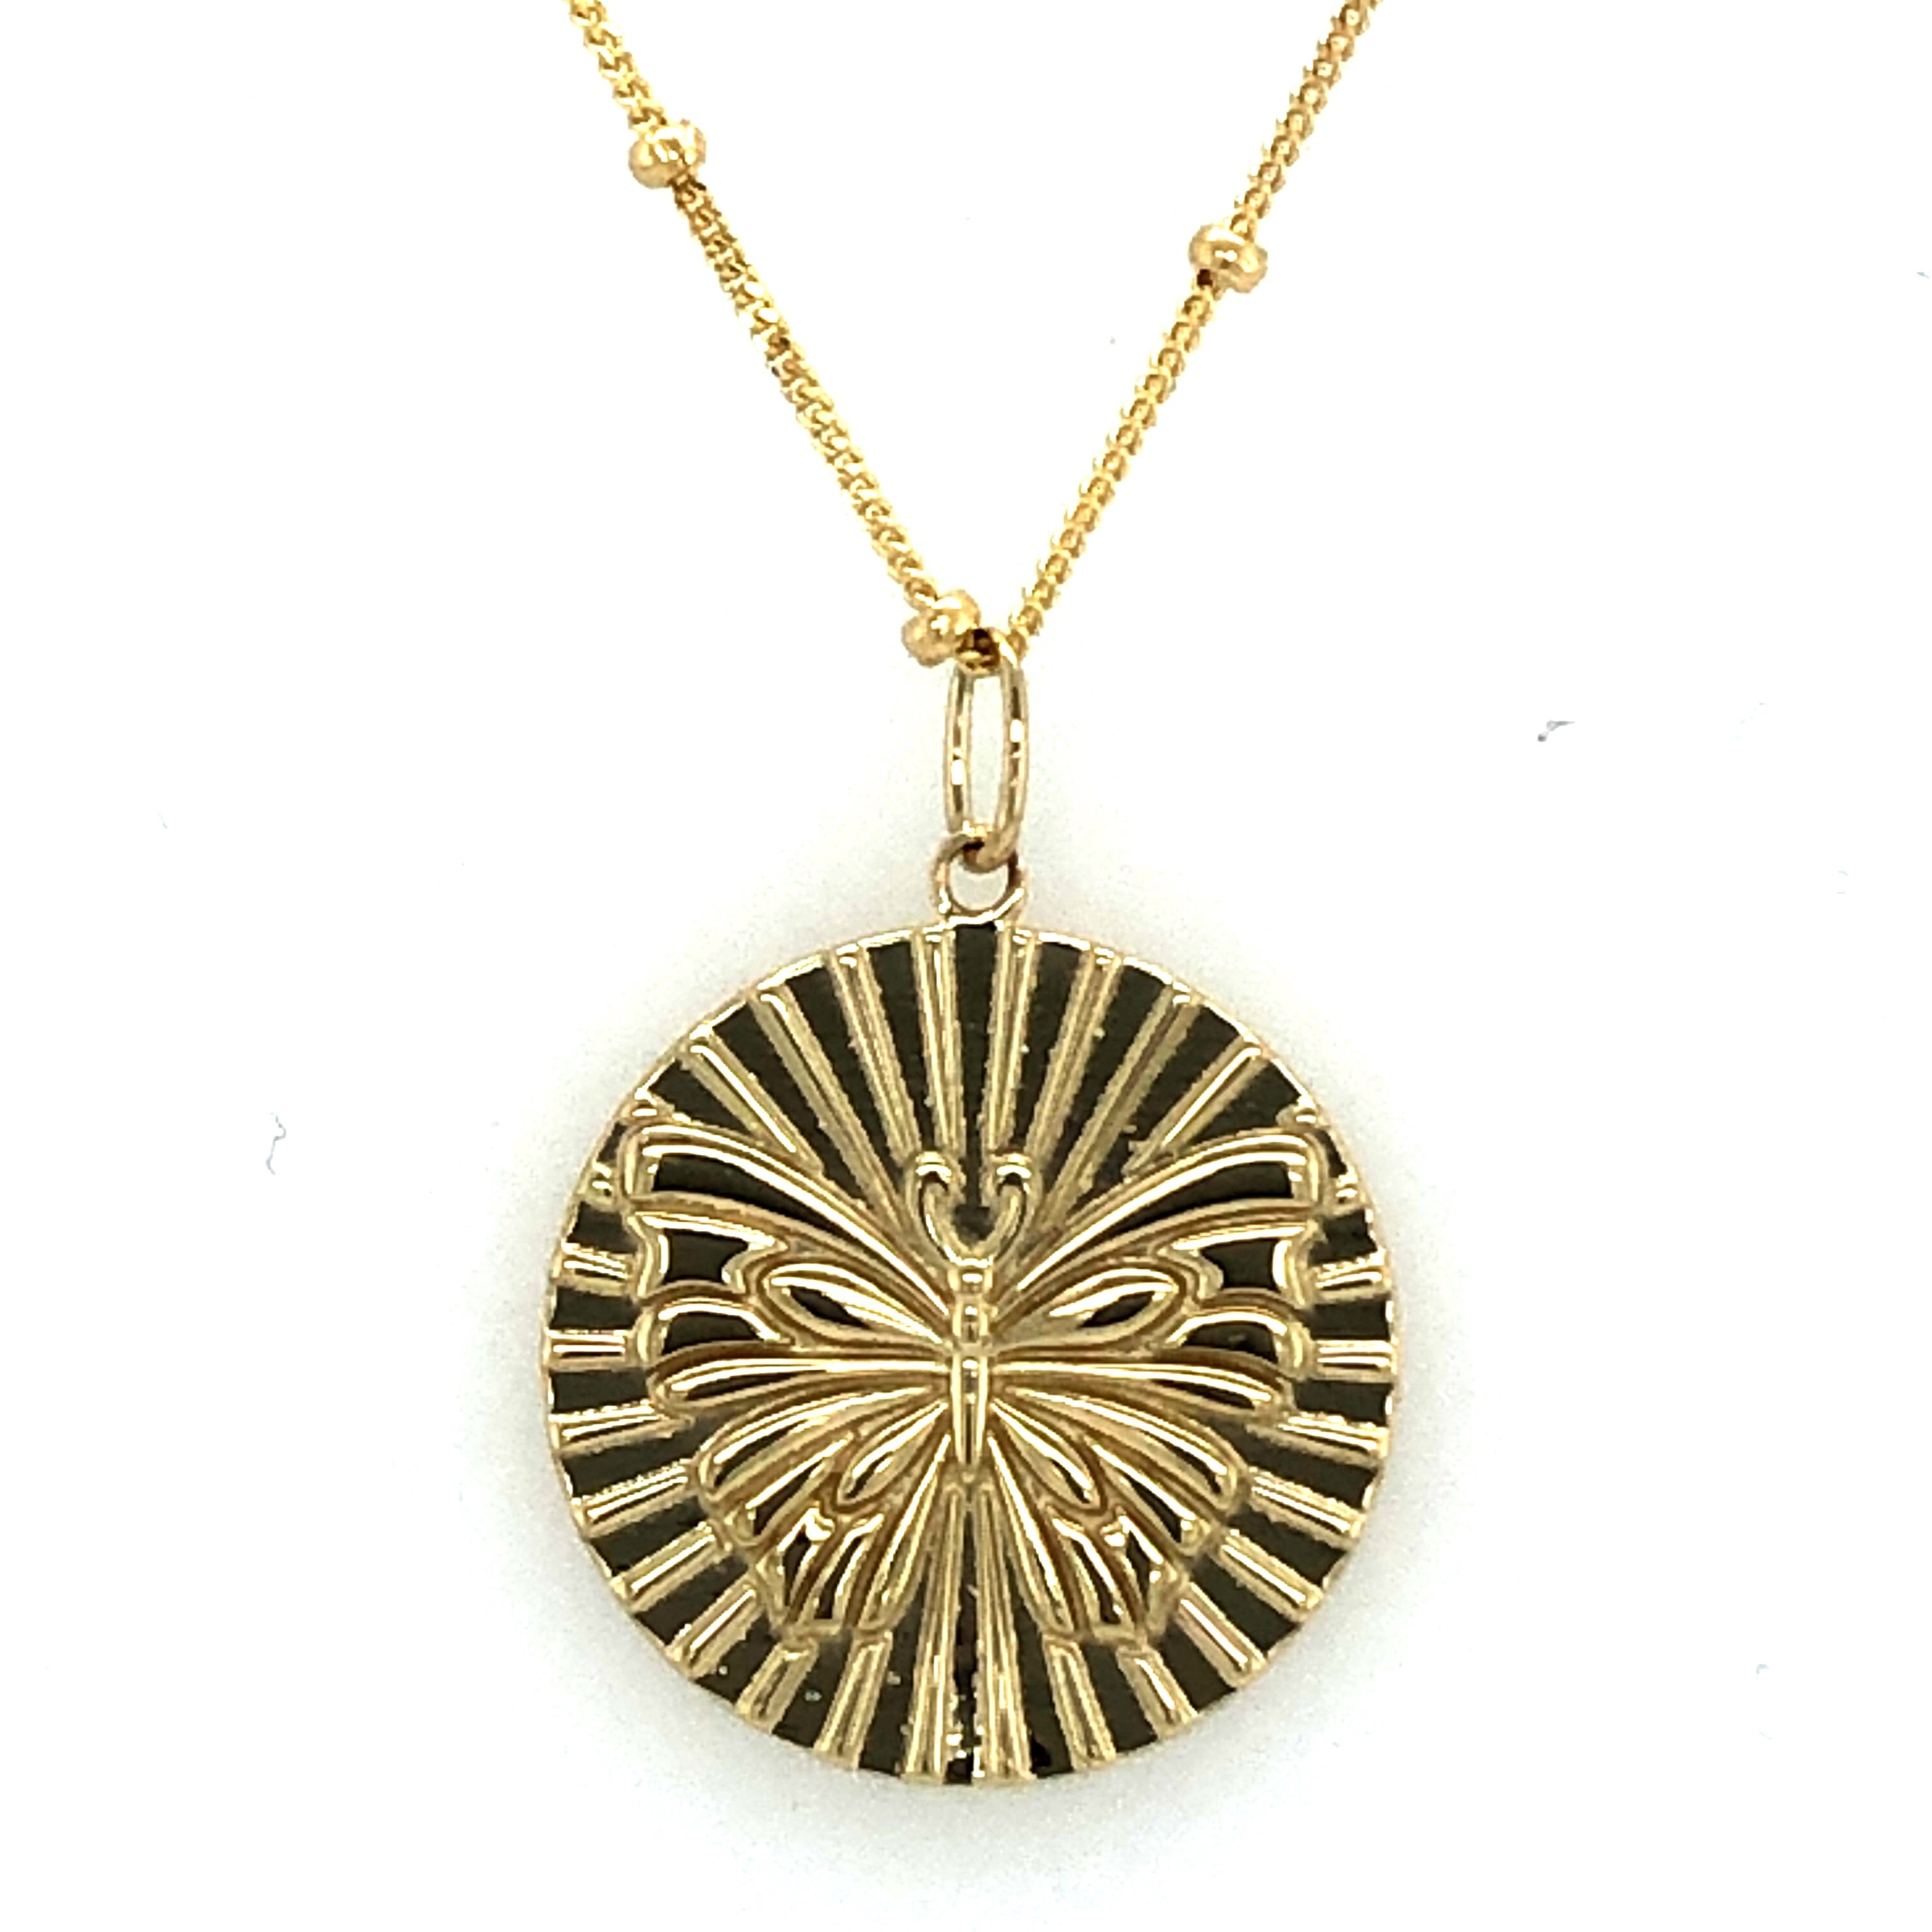 Inspired Gold Necklace - Gold Necklaces